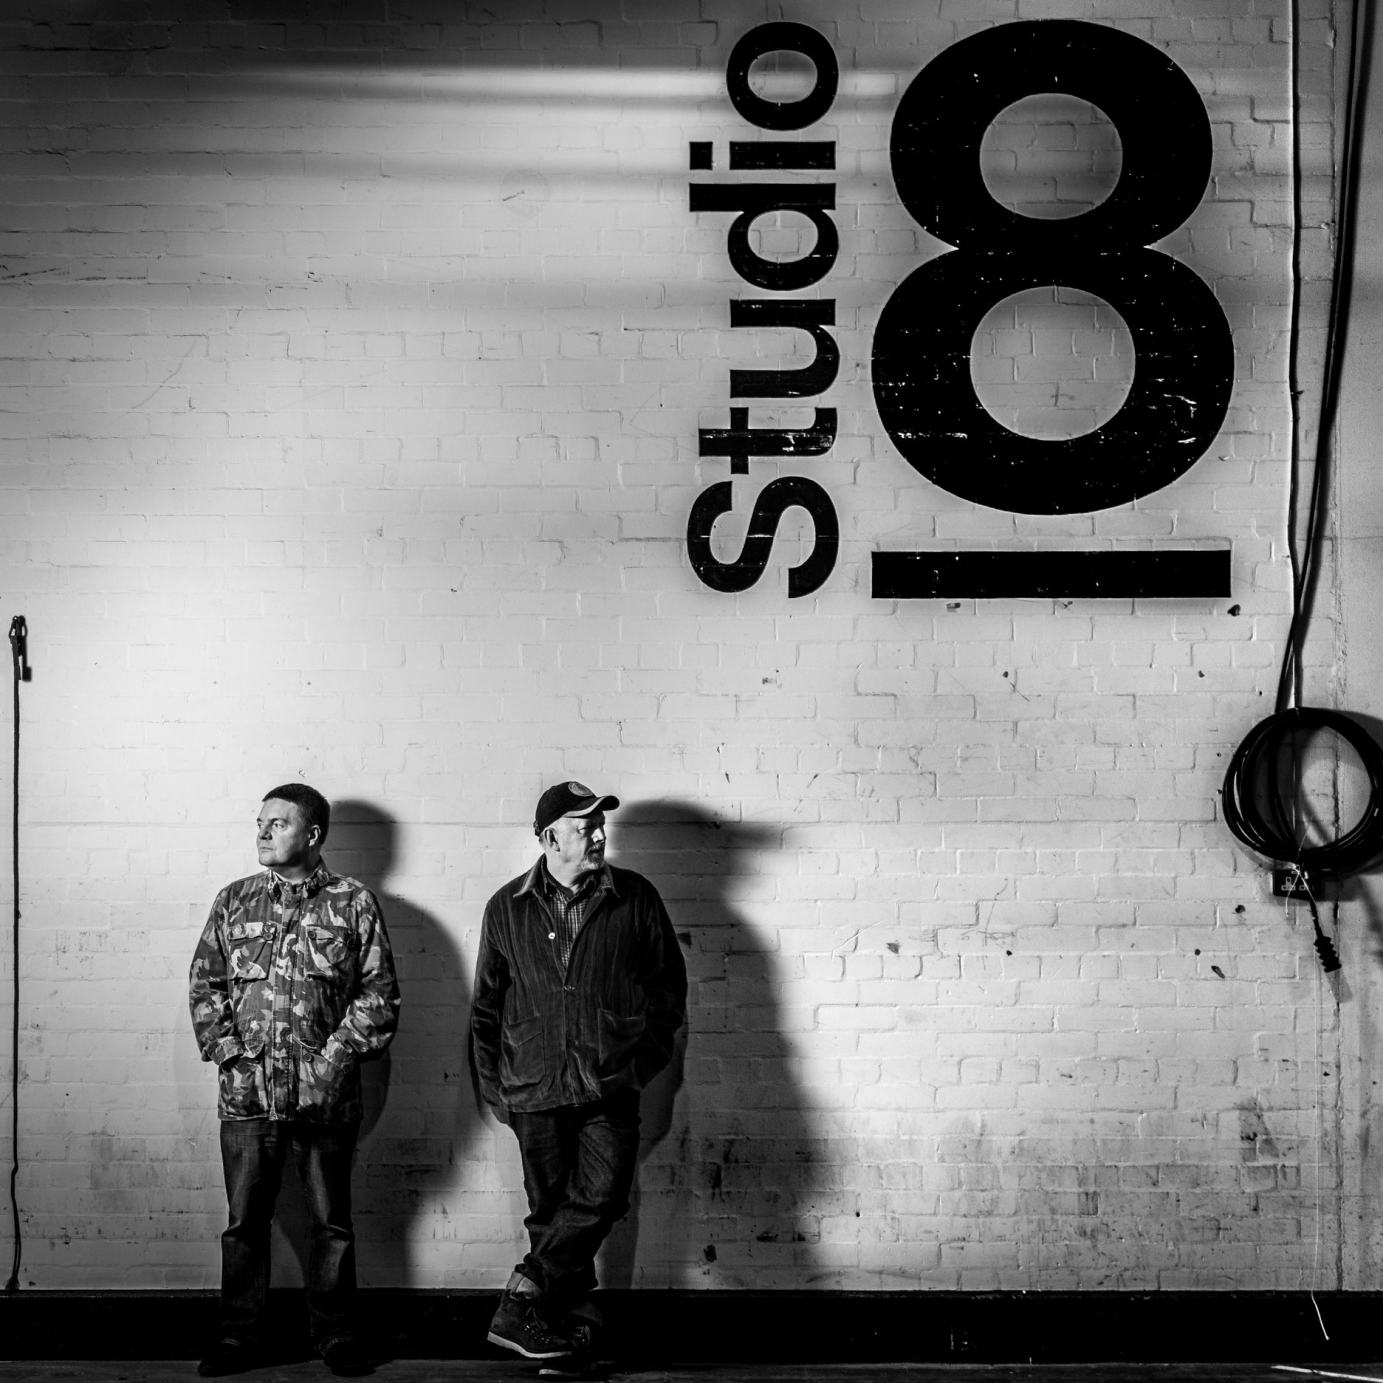 Press photo for 808 State by paul Husband